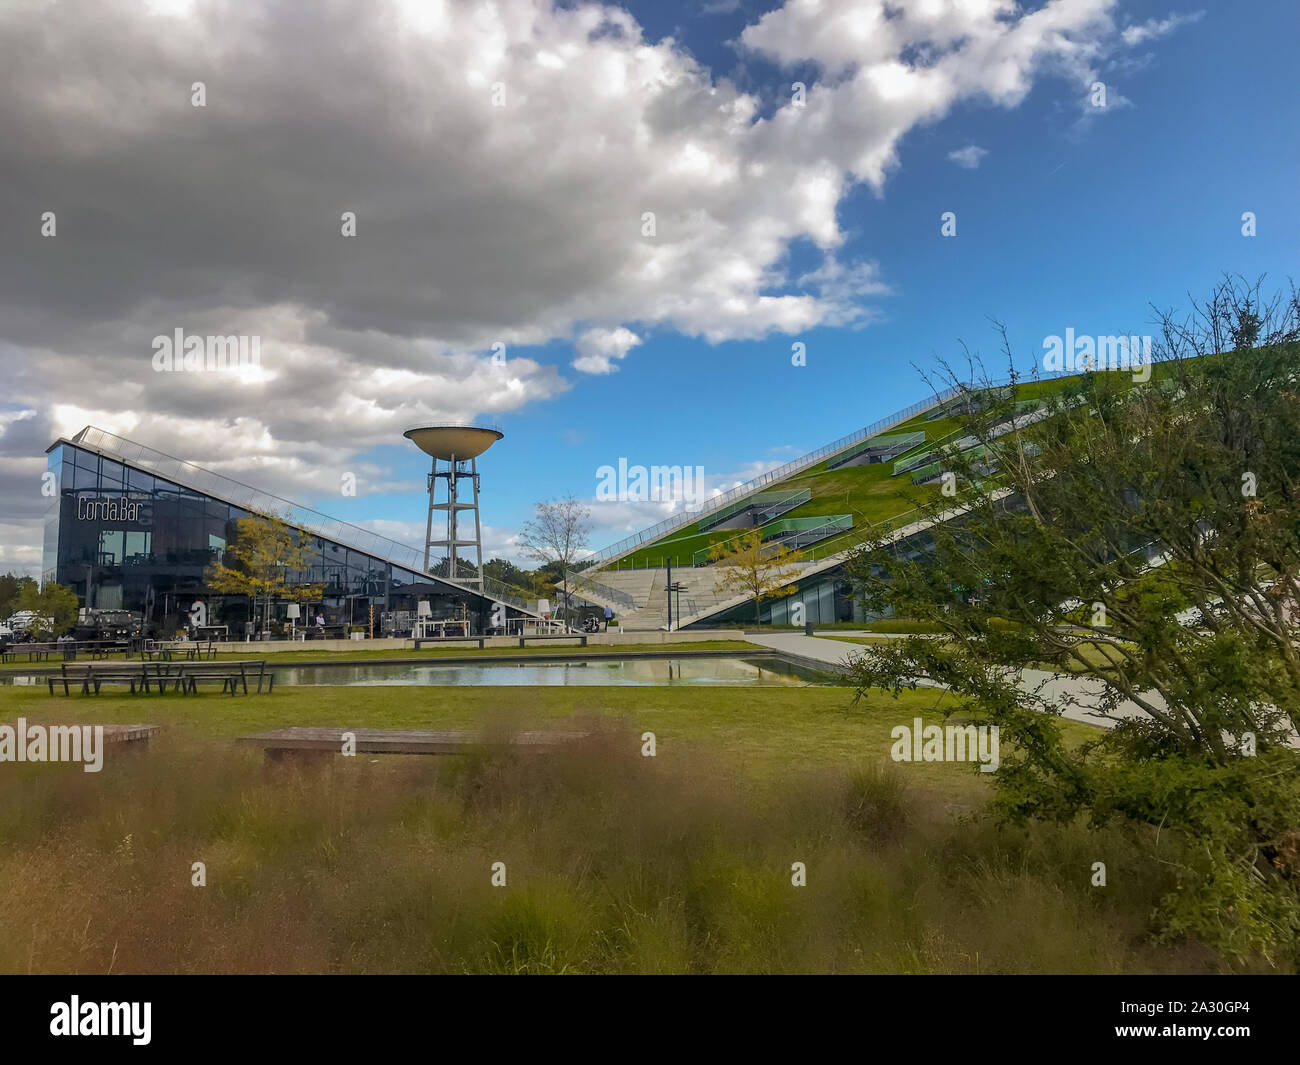 June 2019 - Hasselt, Belgium: The entrance to the tech and research hub Corda Campus, a reconverted Philips site Stock Photo